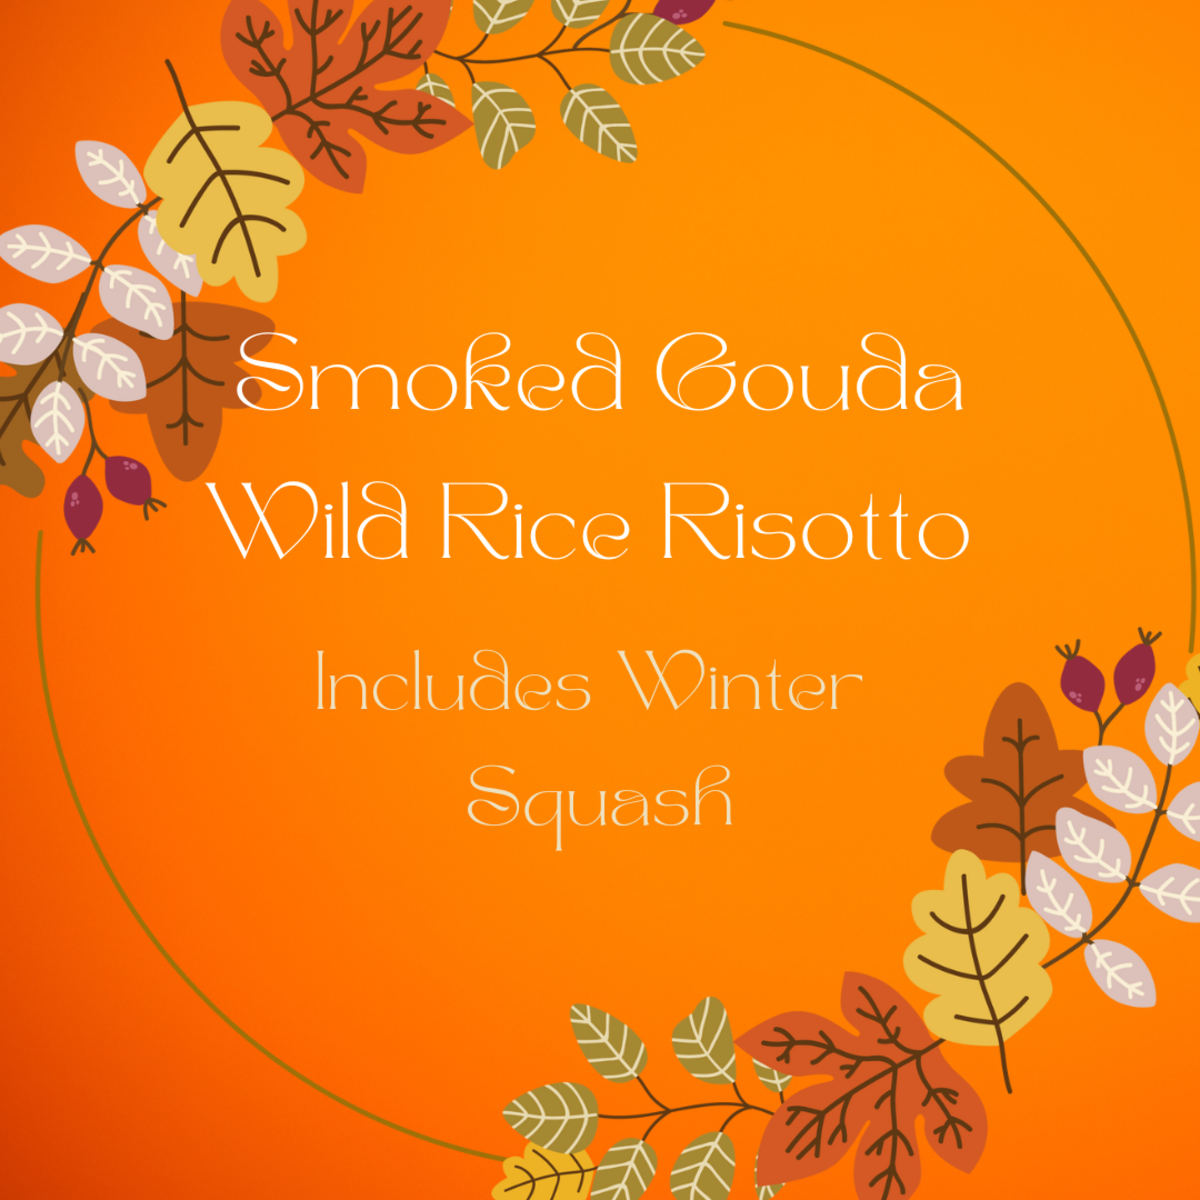 Smoked Gouda Wild Rice Risotto With Winter Squash